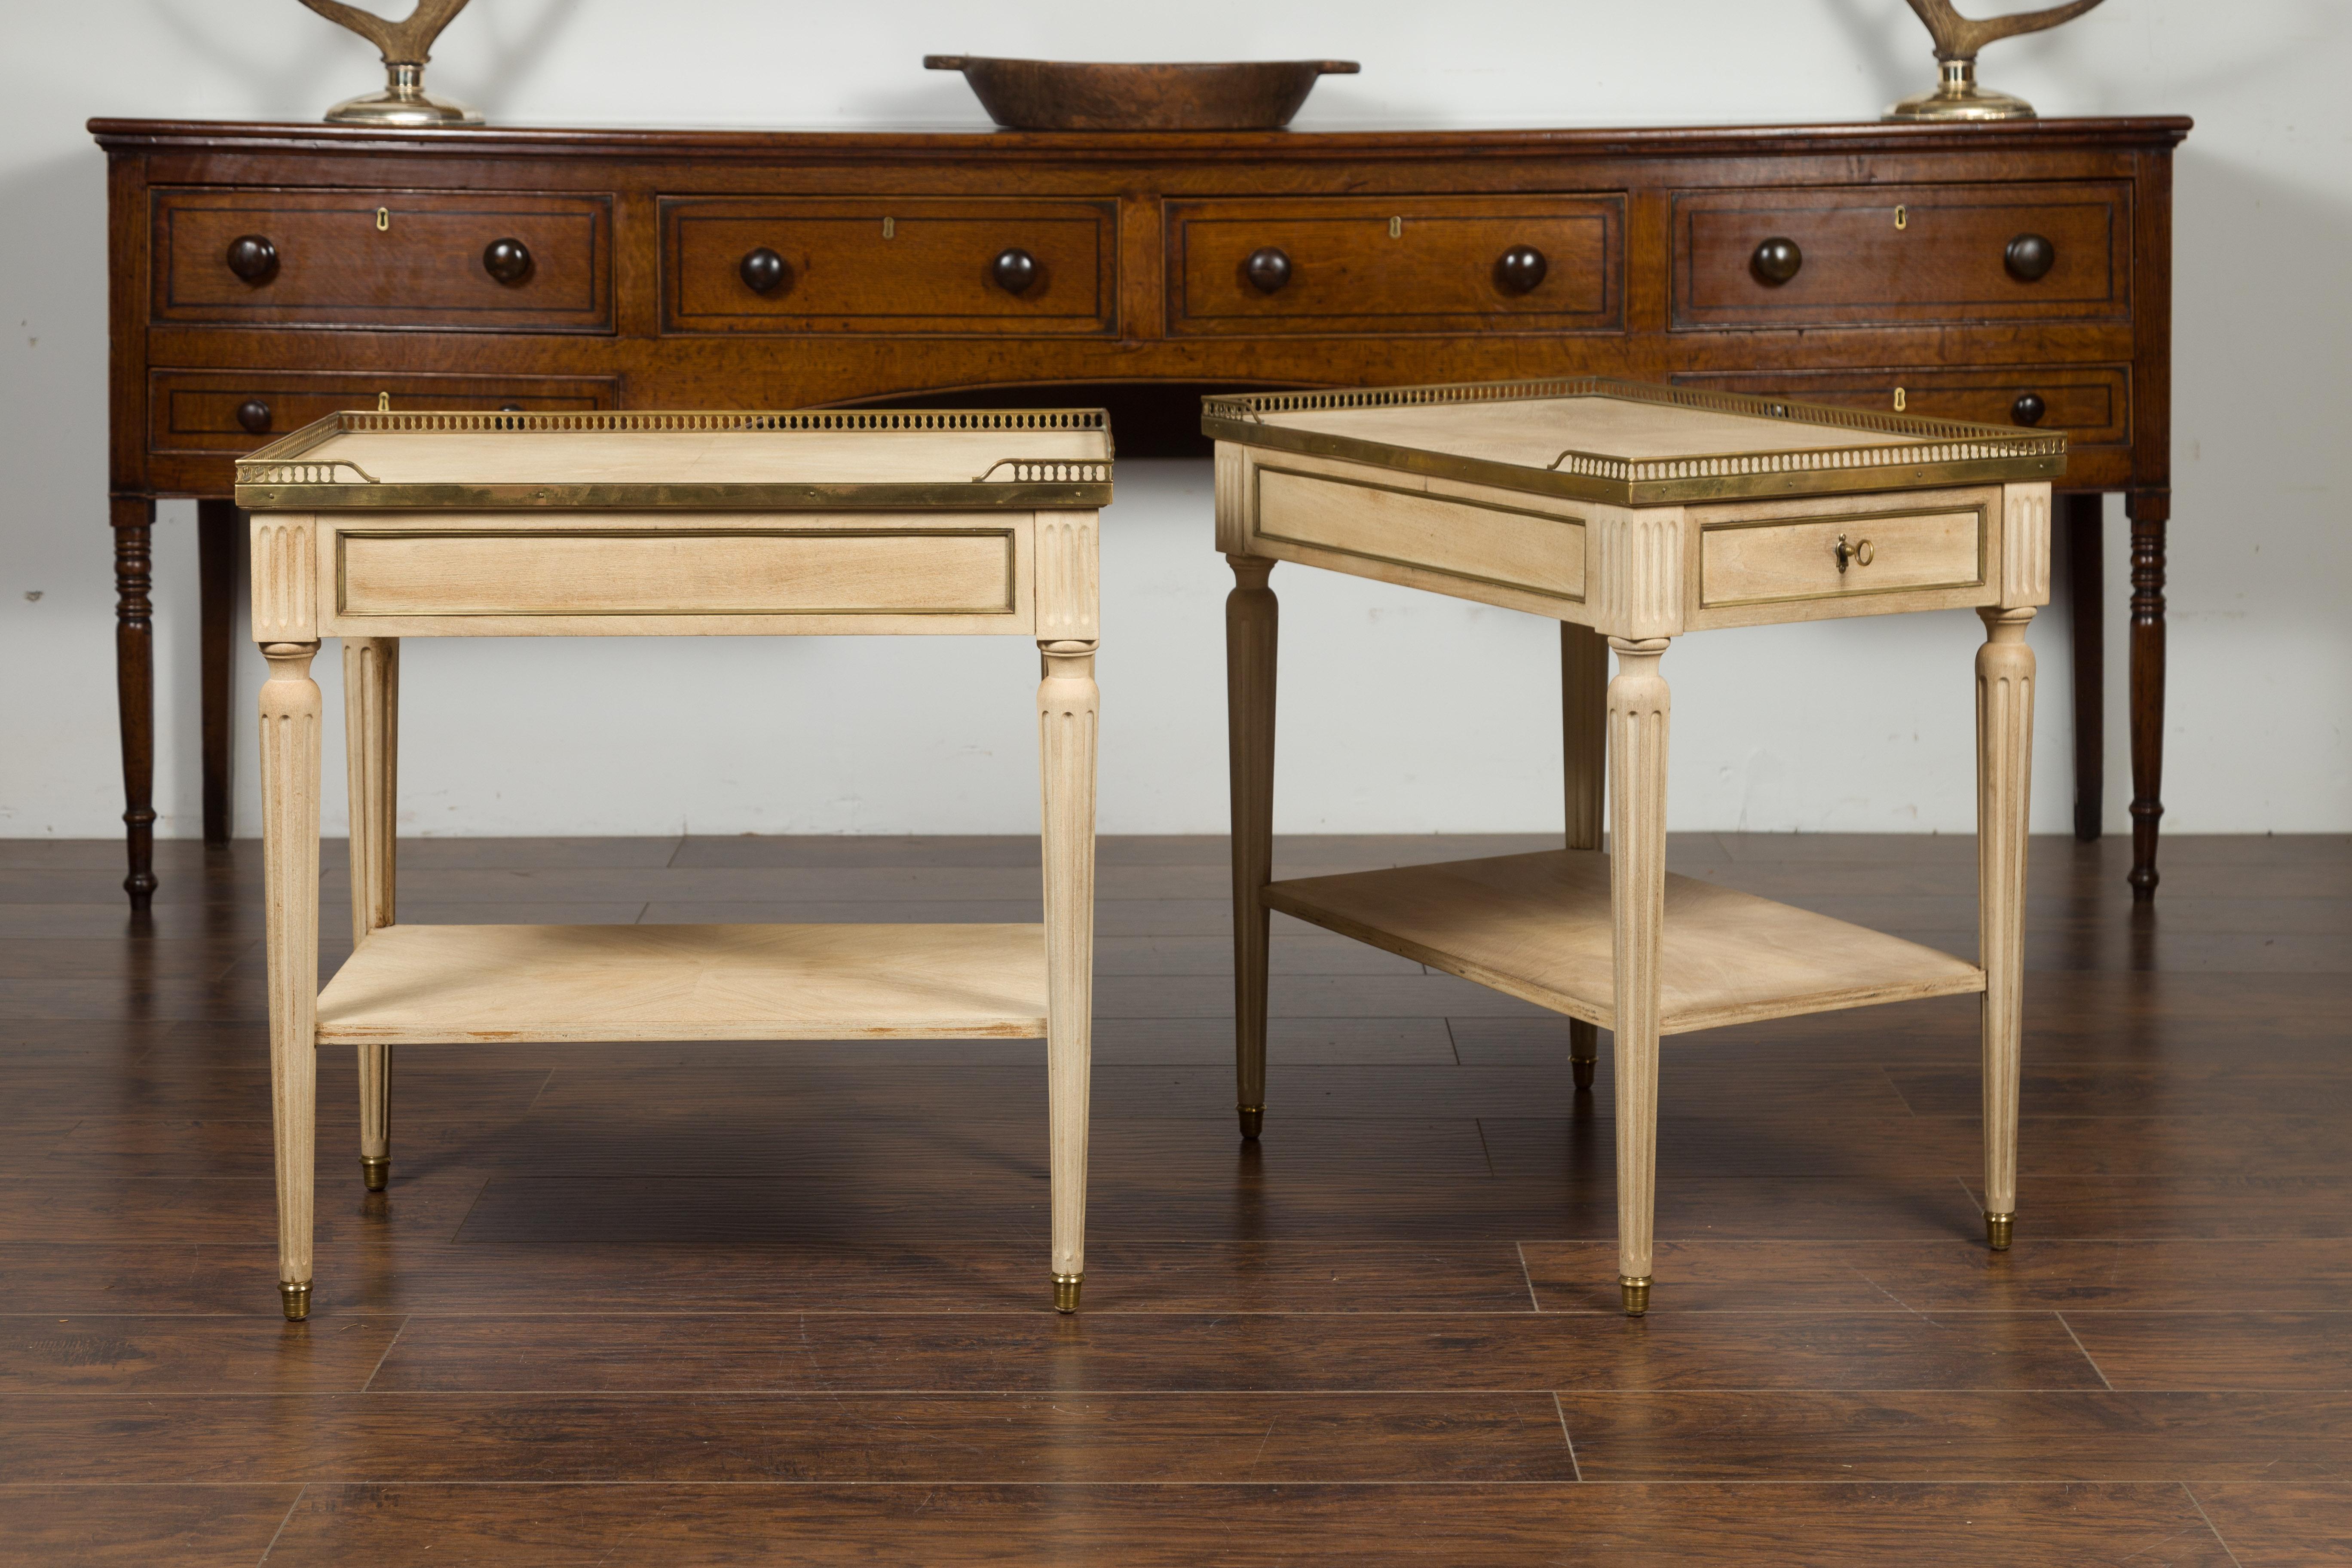 A pair of vintage French walnut bleached wood end tables from the mid-20th century, with bronze gallery, brass trim and drawers. Created in France during the midcentury period, each of this pair of end tables features a quarter-veneered rectangular